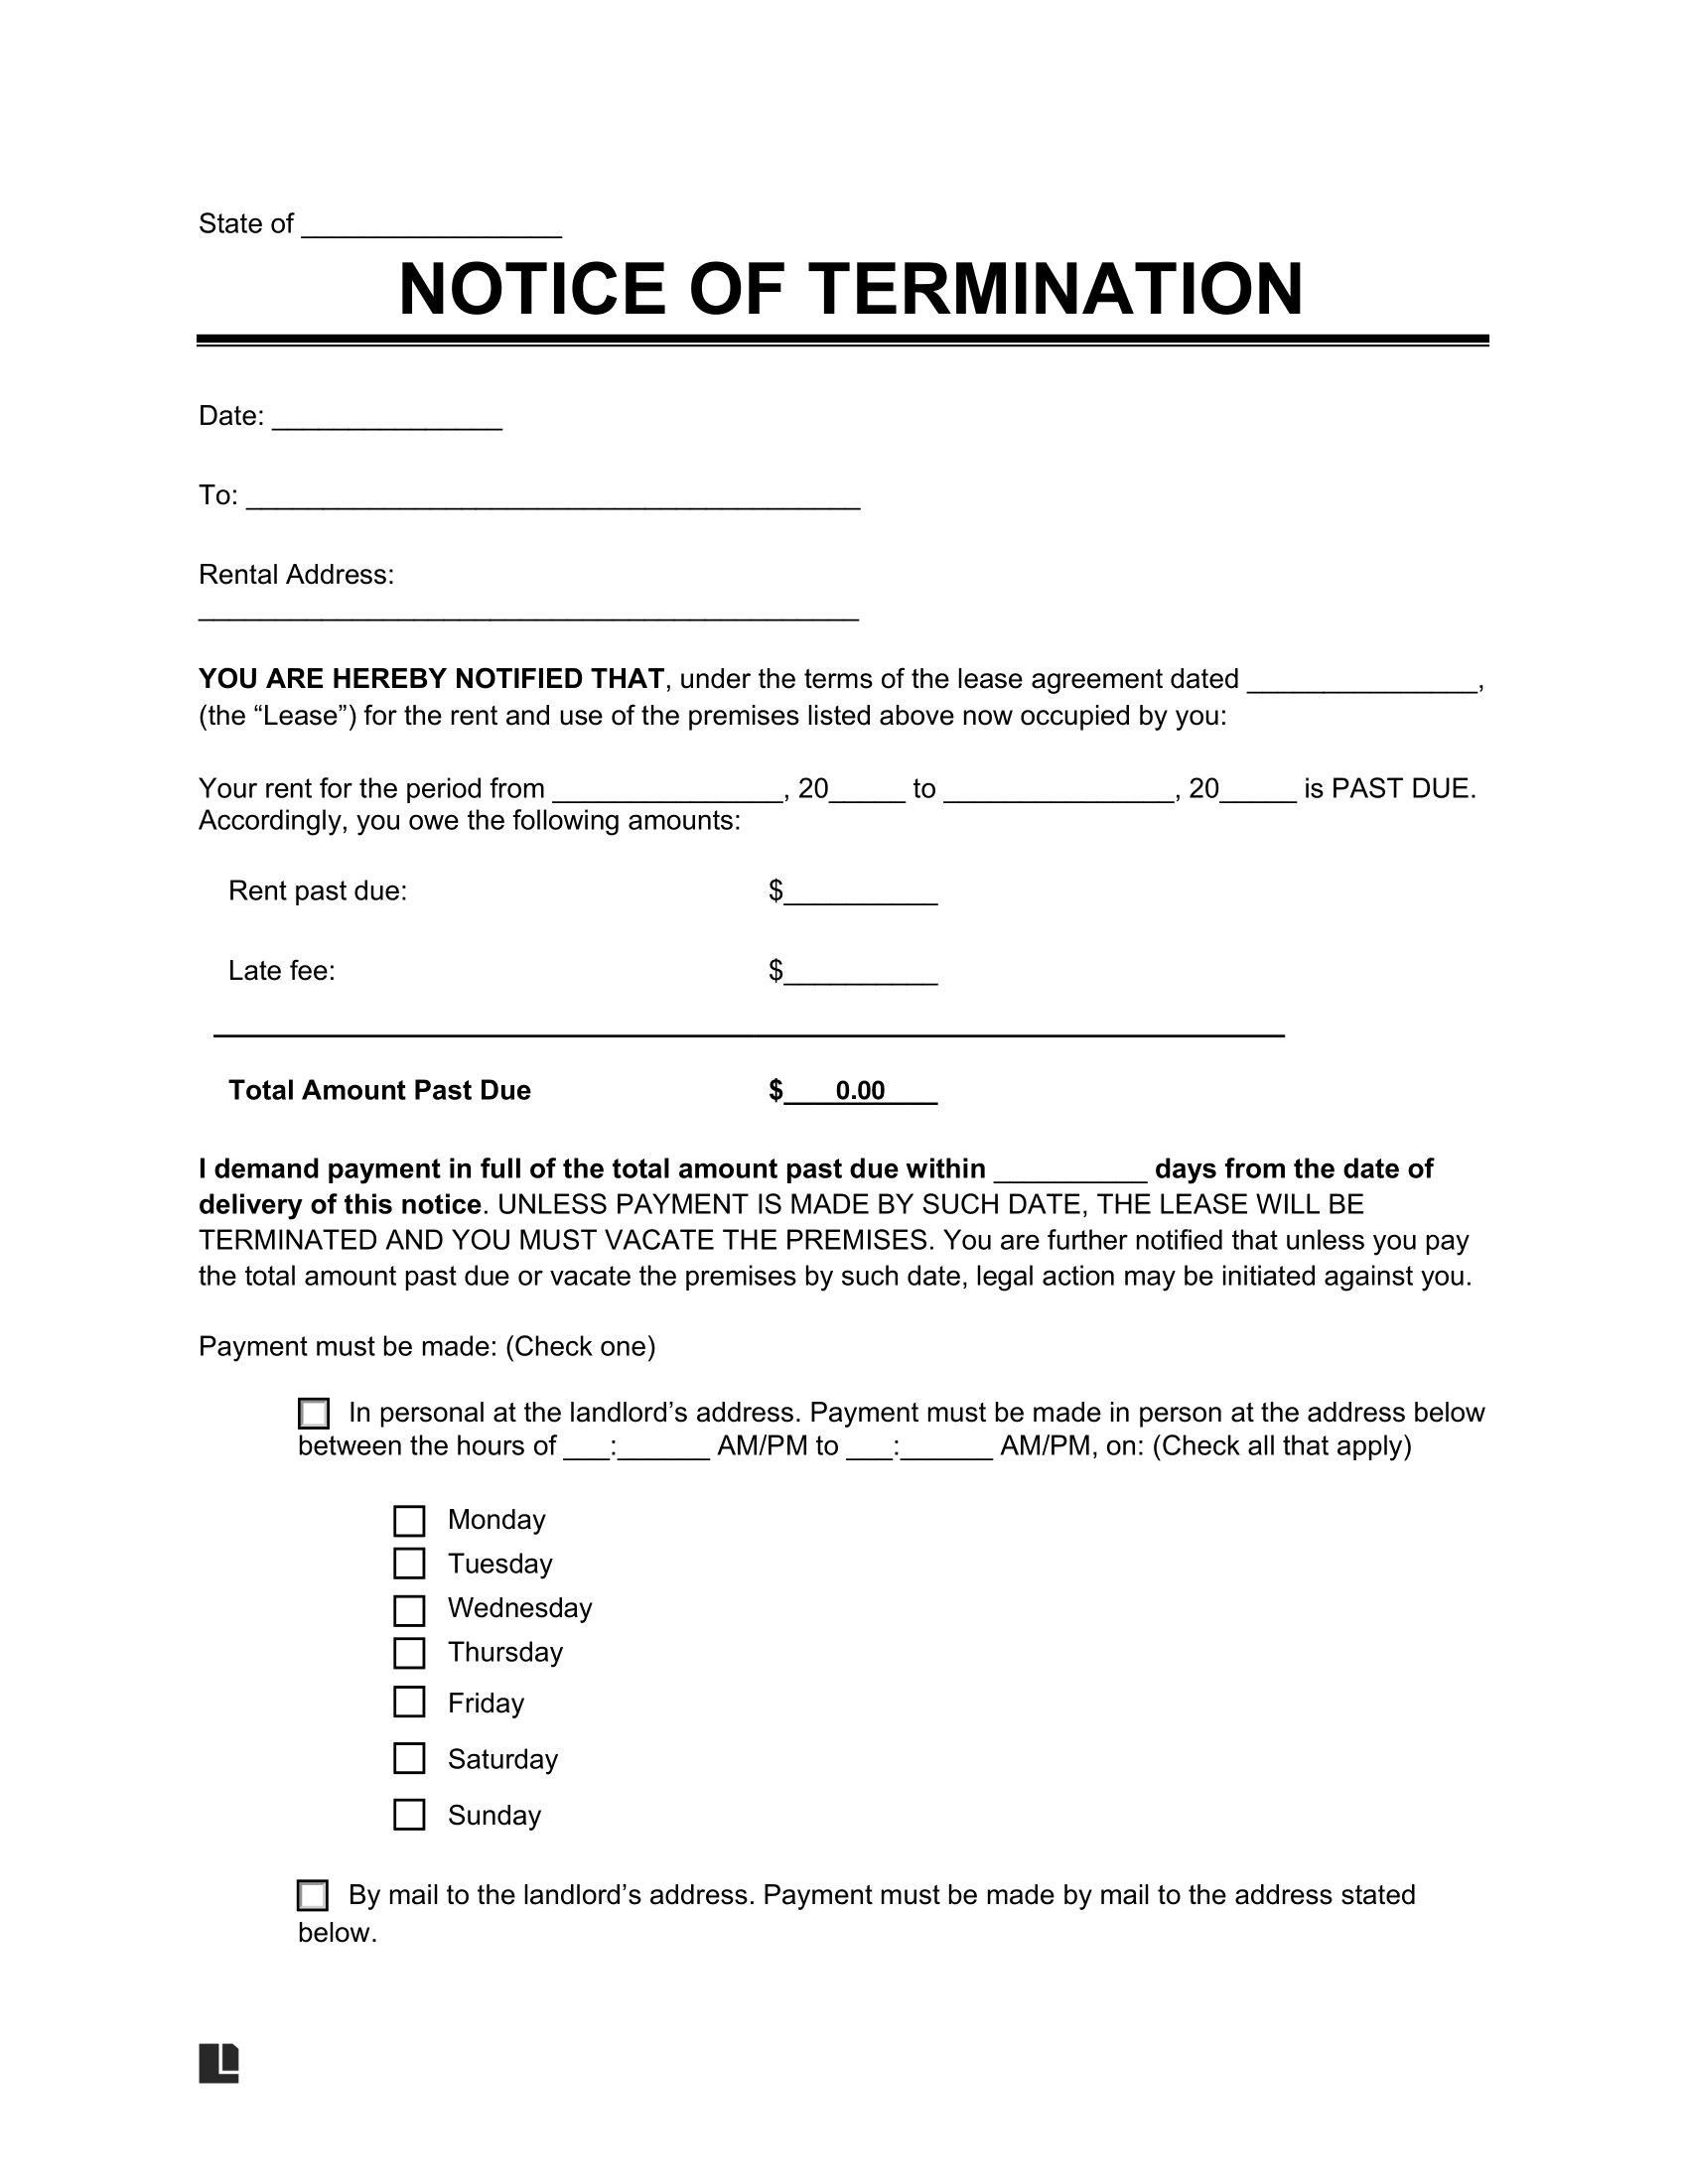 free-eviction-notice-notice-to-quit-templates-pdf-word-landlord-eviction-notice-form